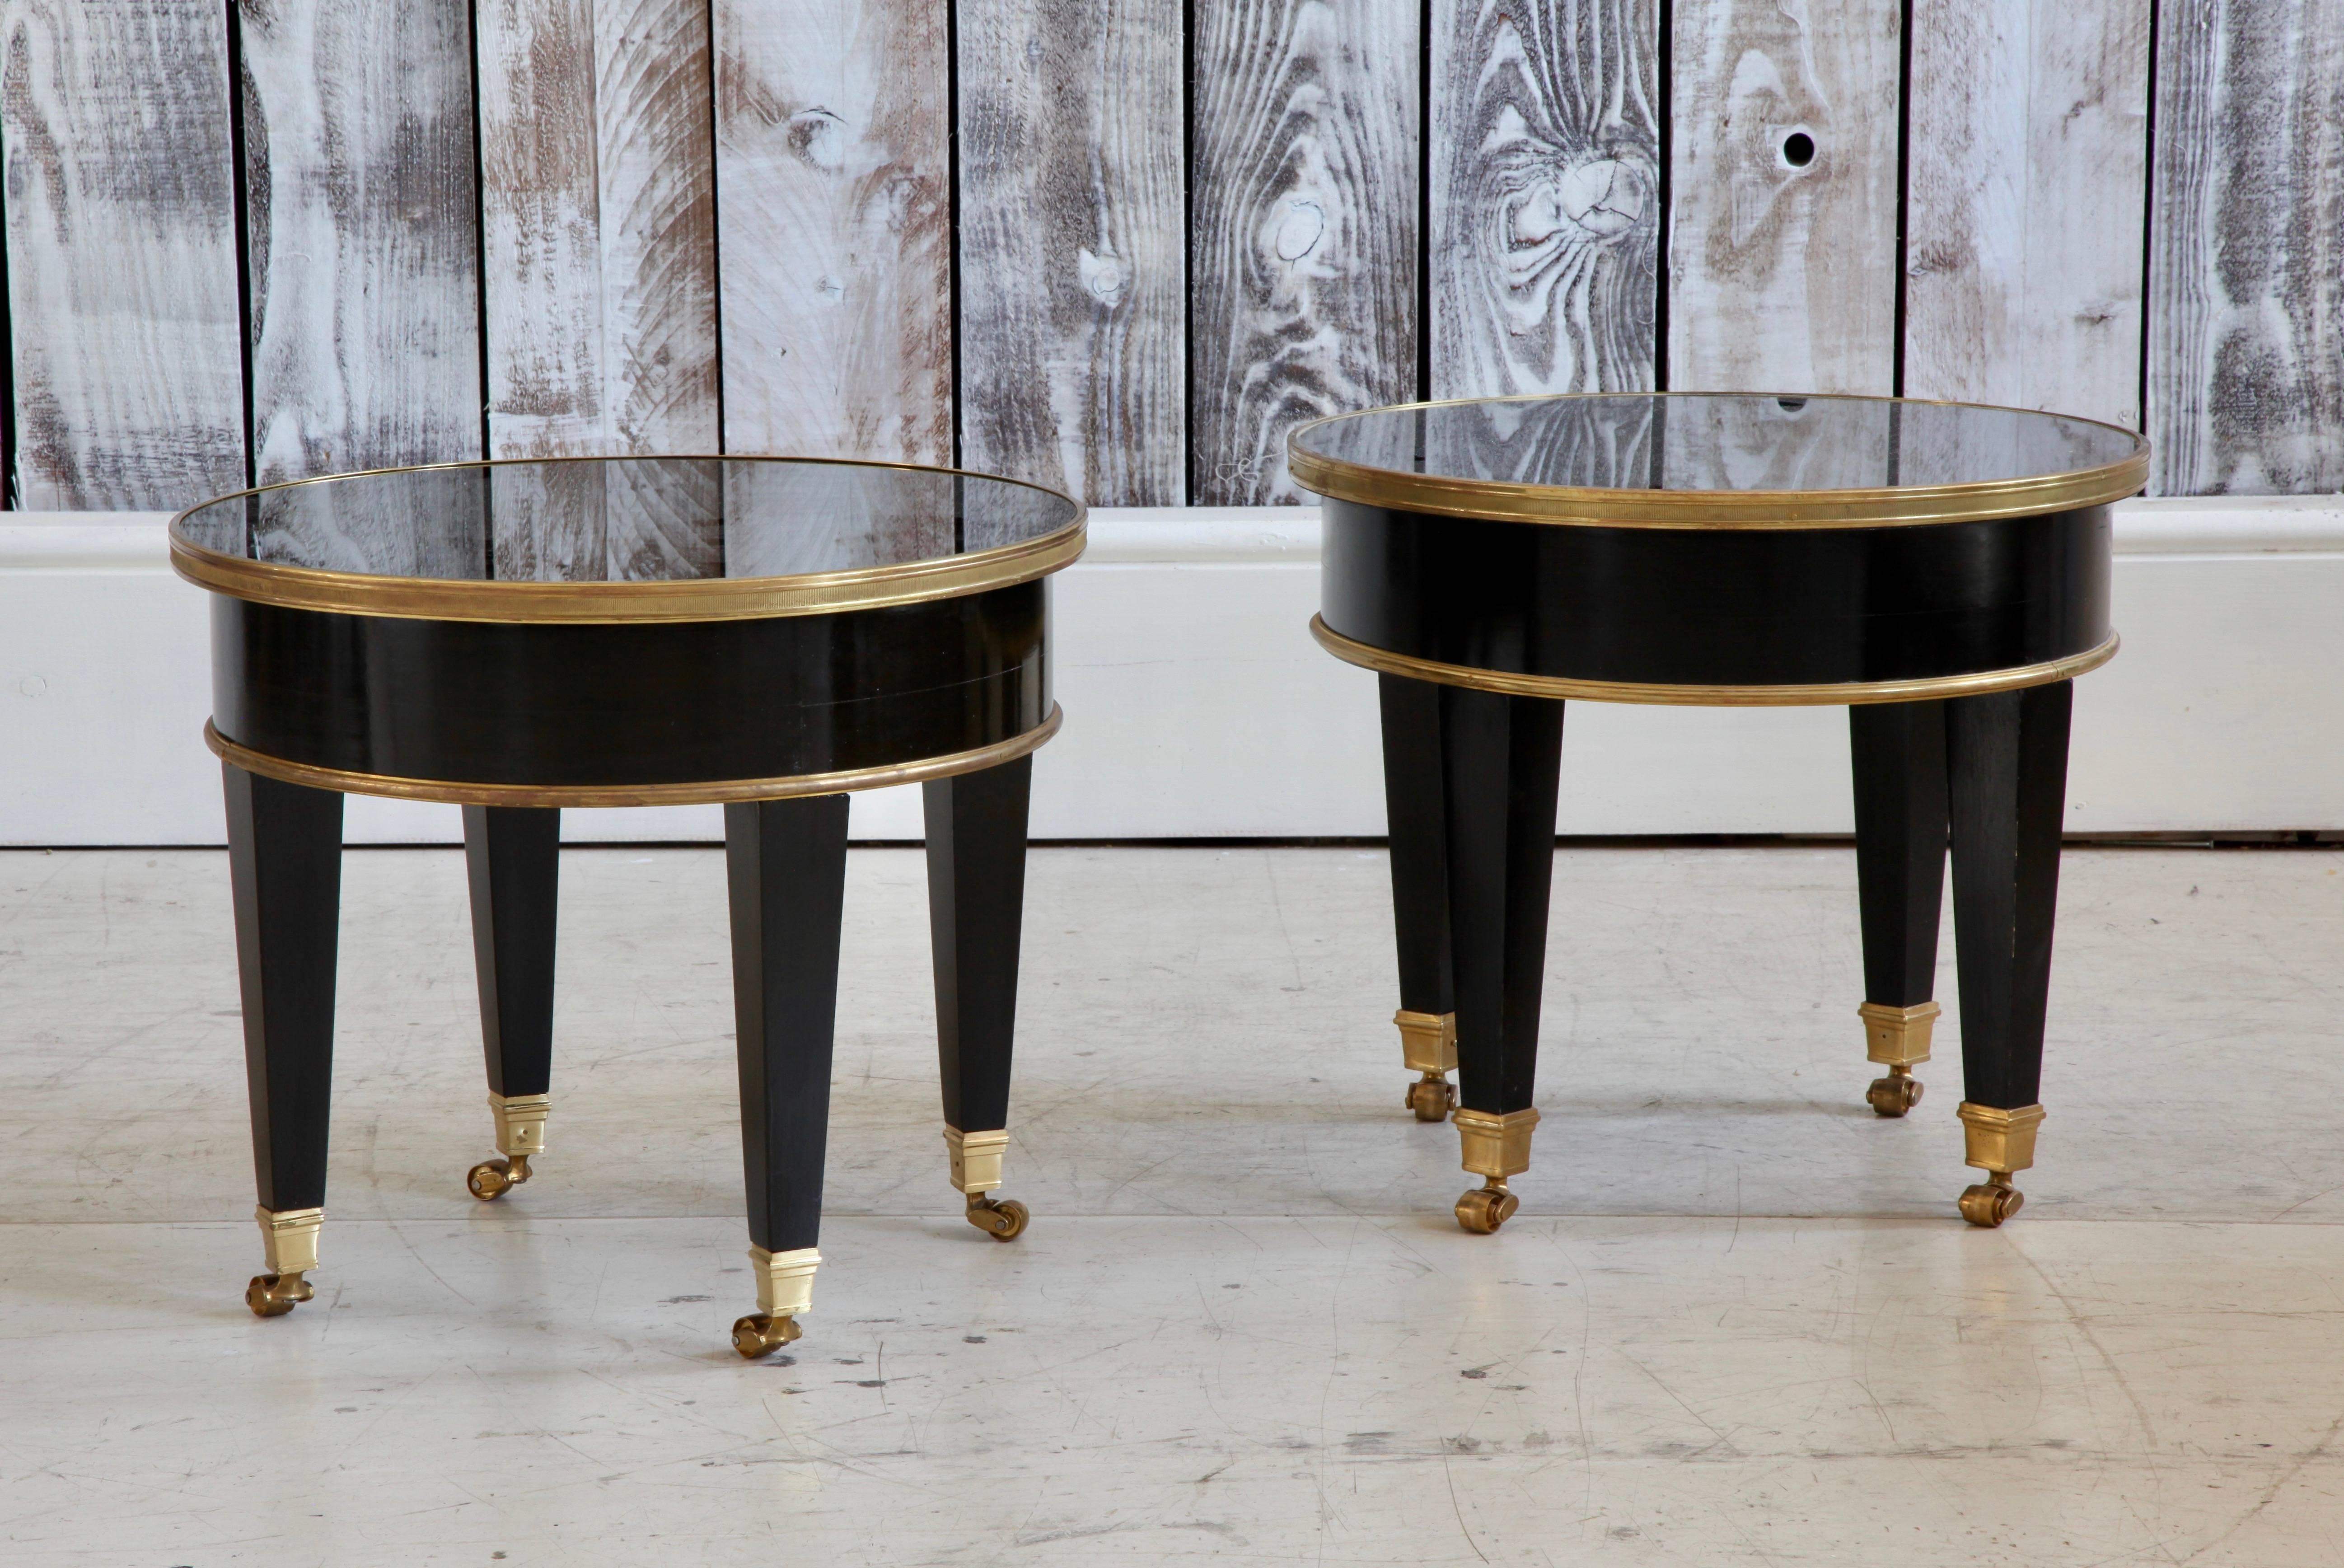 Coffee table or side table made in the style of Maison Jansen.
Black lacquer with bronze fittings and glass top.